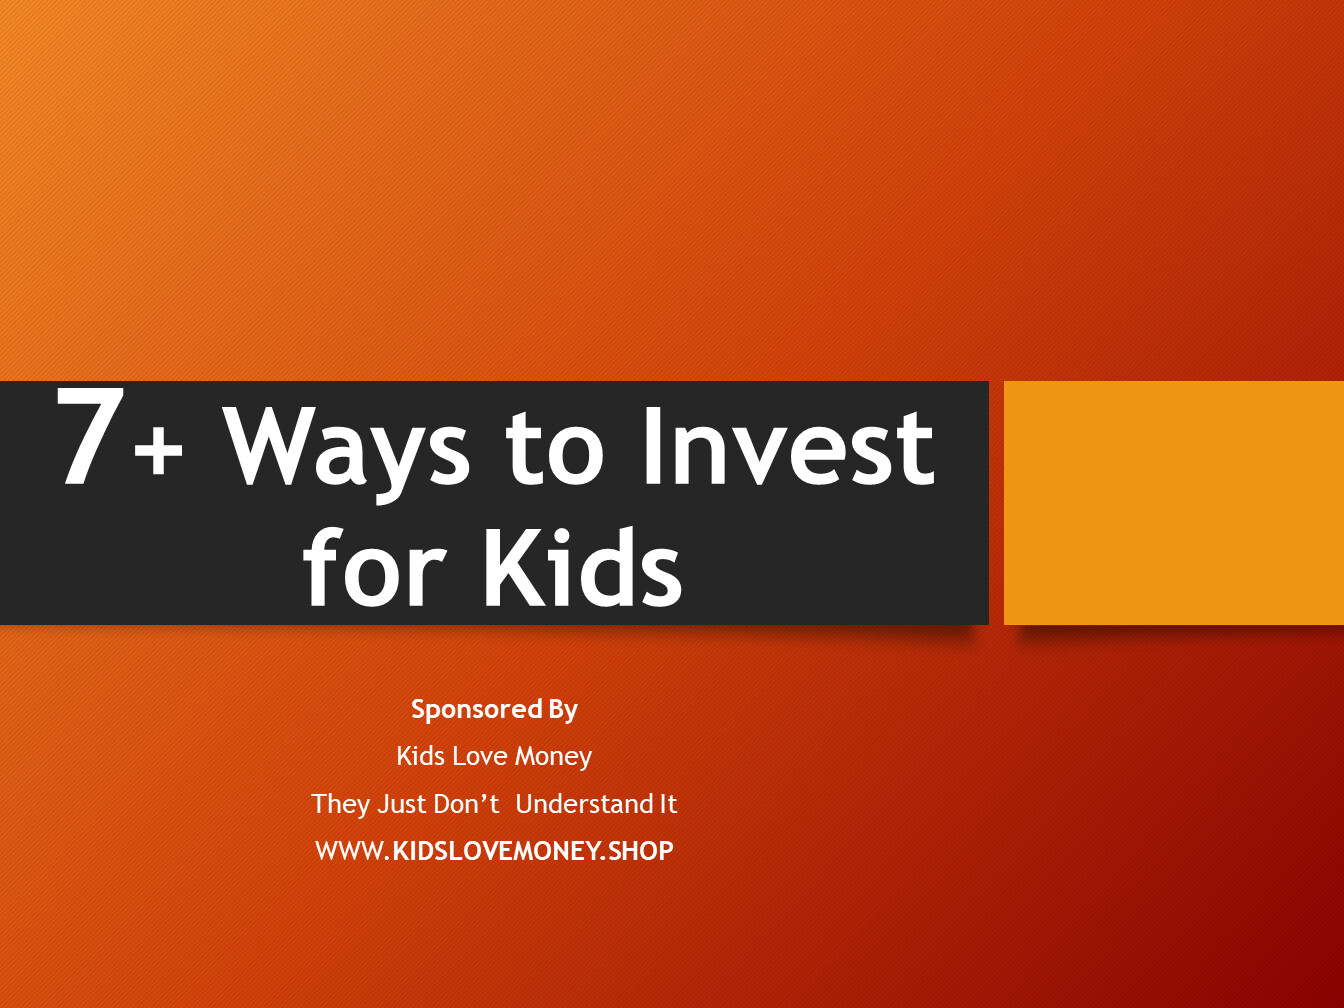 7+ Ways to Invest for Kids